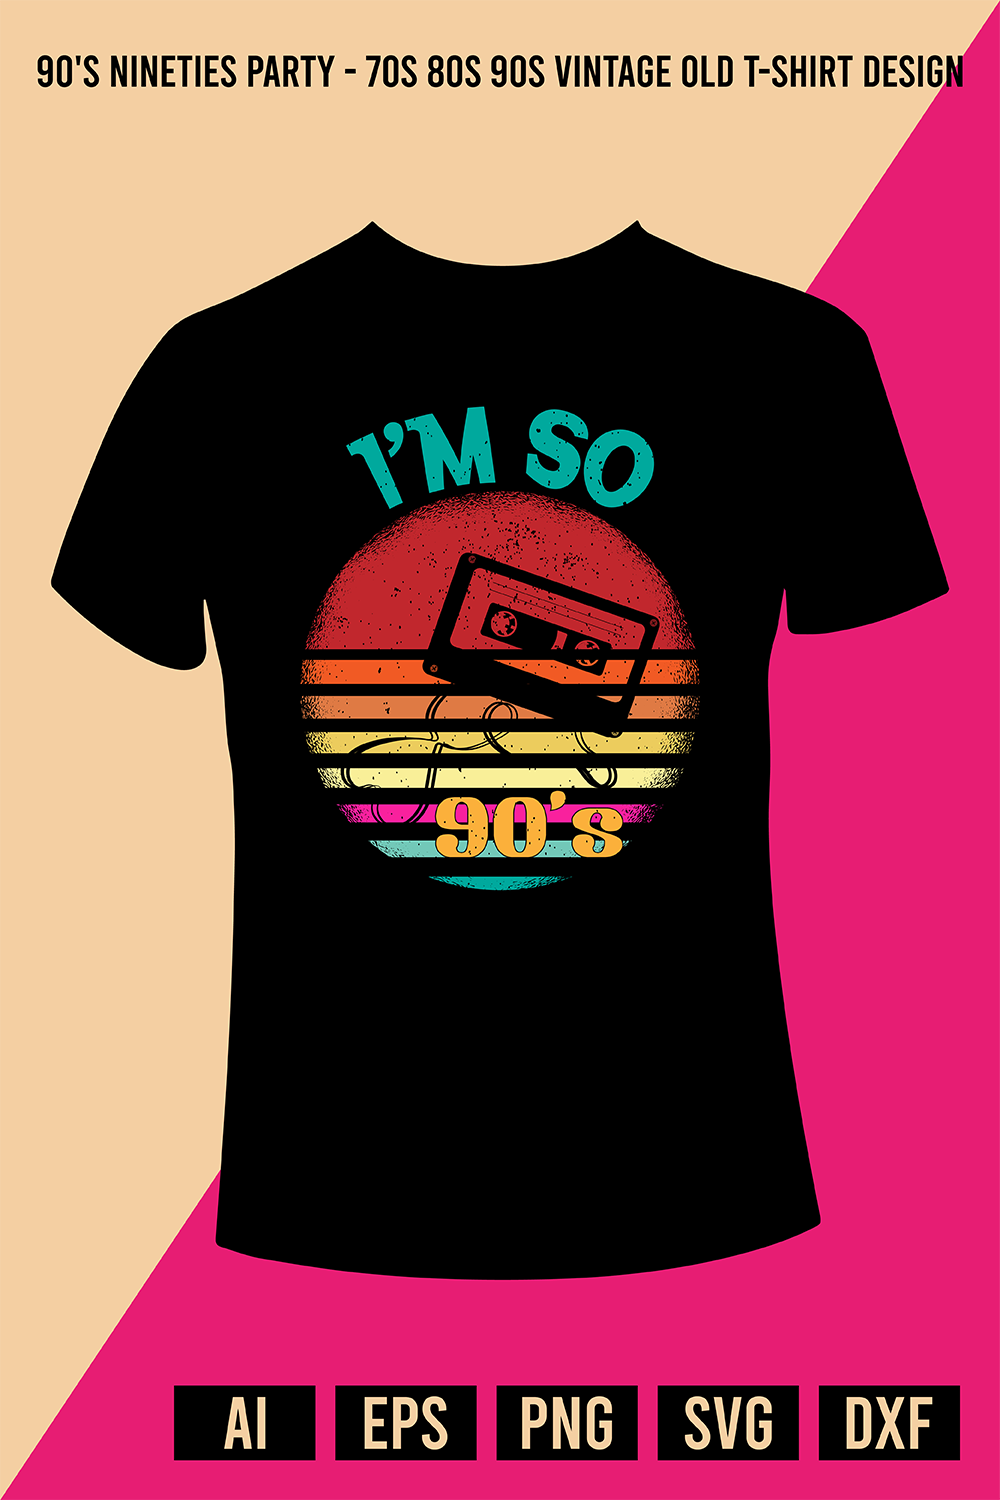 90's nineties party - 70s 80s 90s Vintage old T-Shirt Design pinterest preview image.